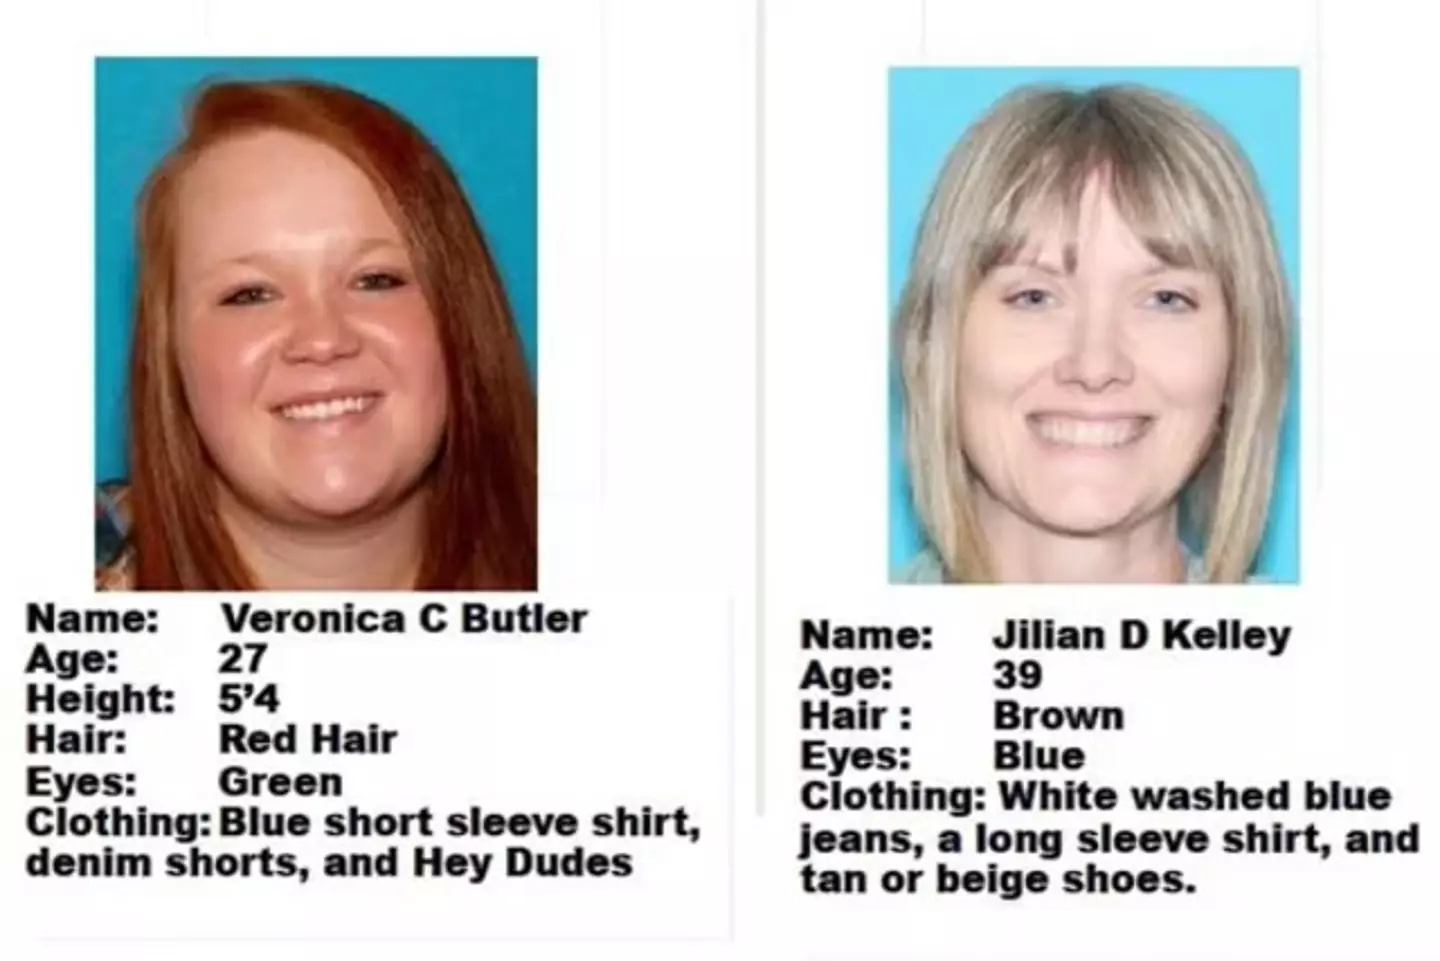 Both women have been missing since March 30. (Oklahoma State Bureau of Investigation)